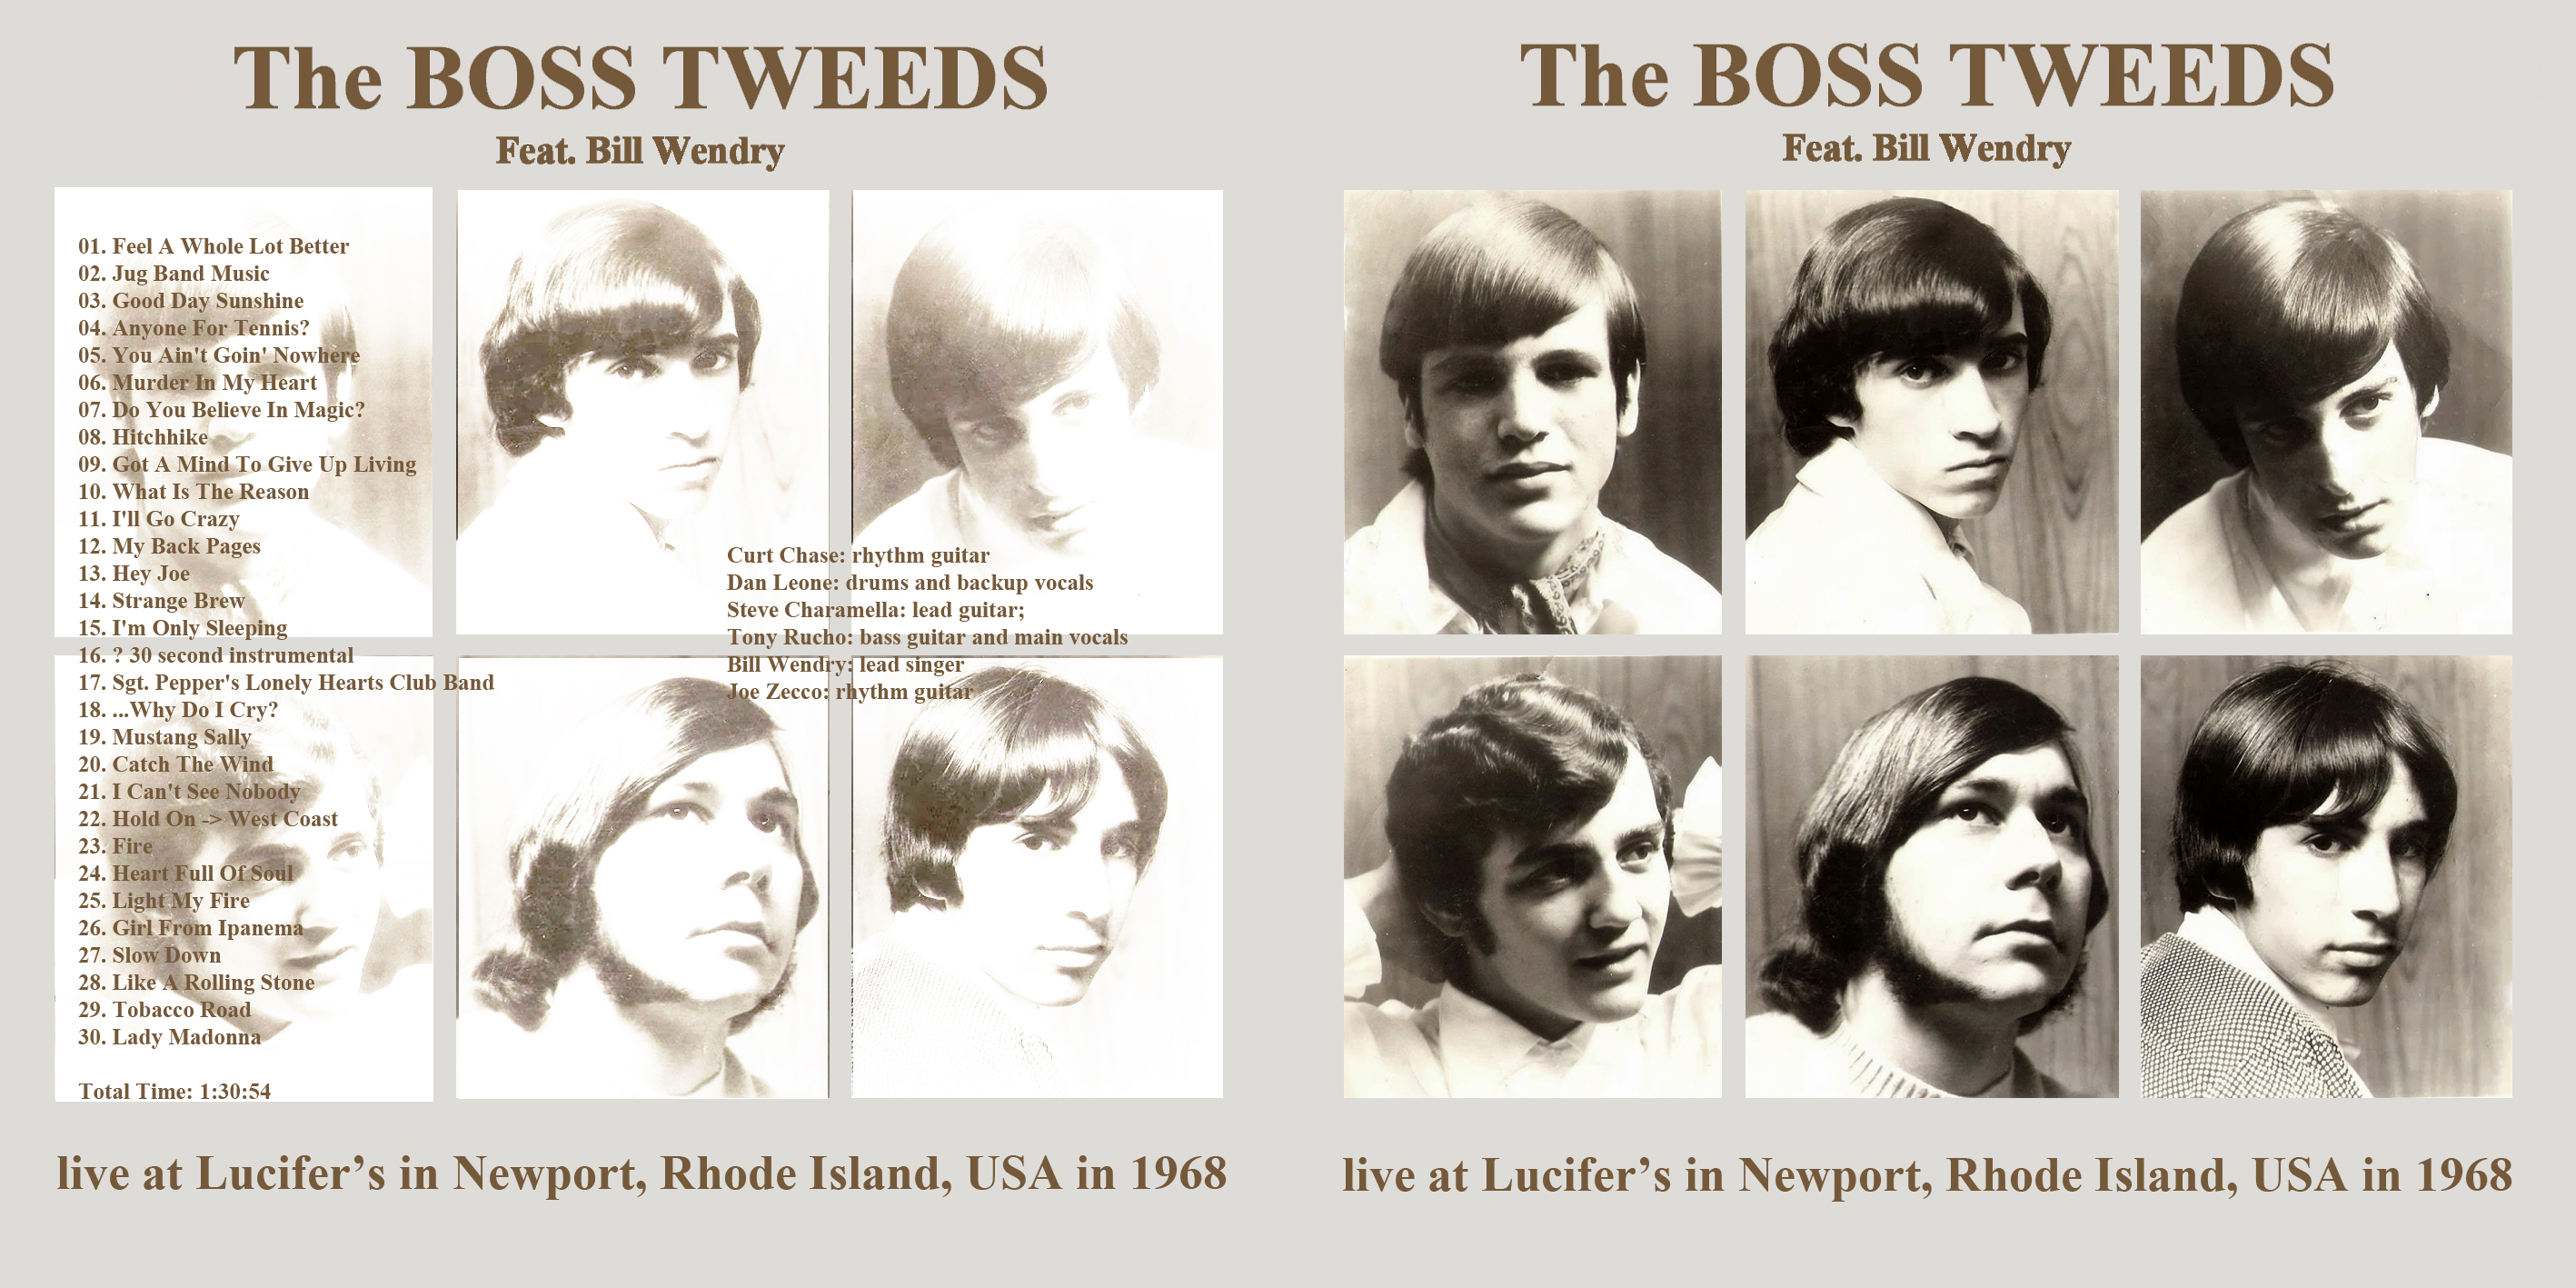 boss tweeds aka bill wendry and the boss tweeds cd live in newport in 1968 cover out